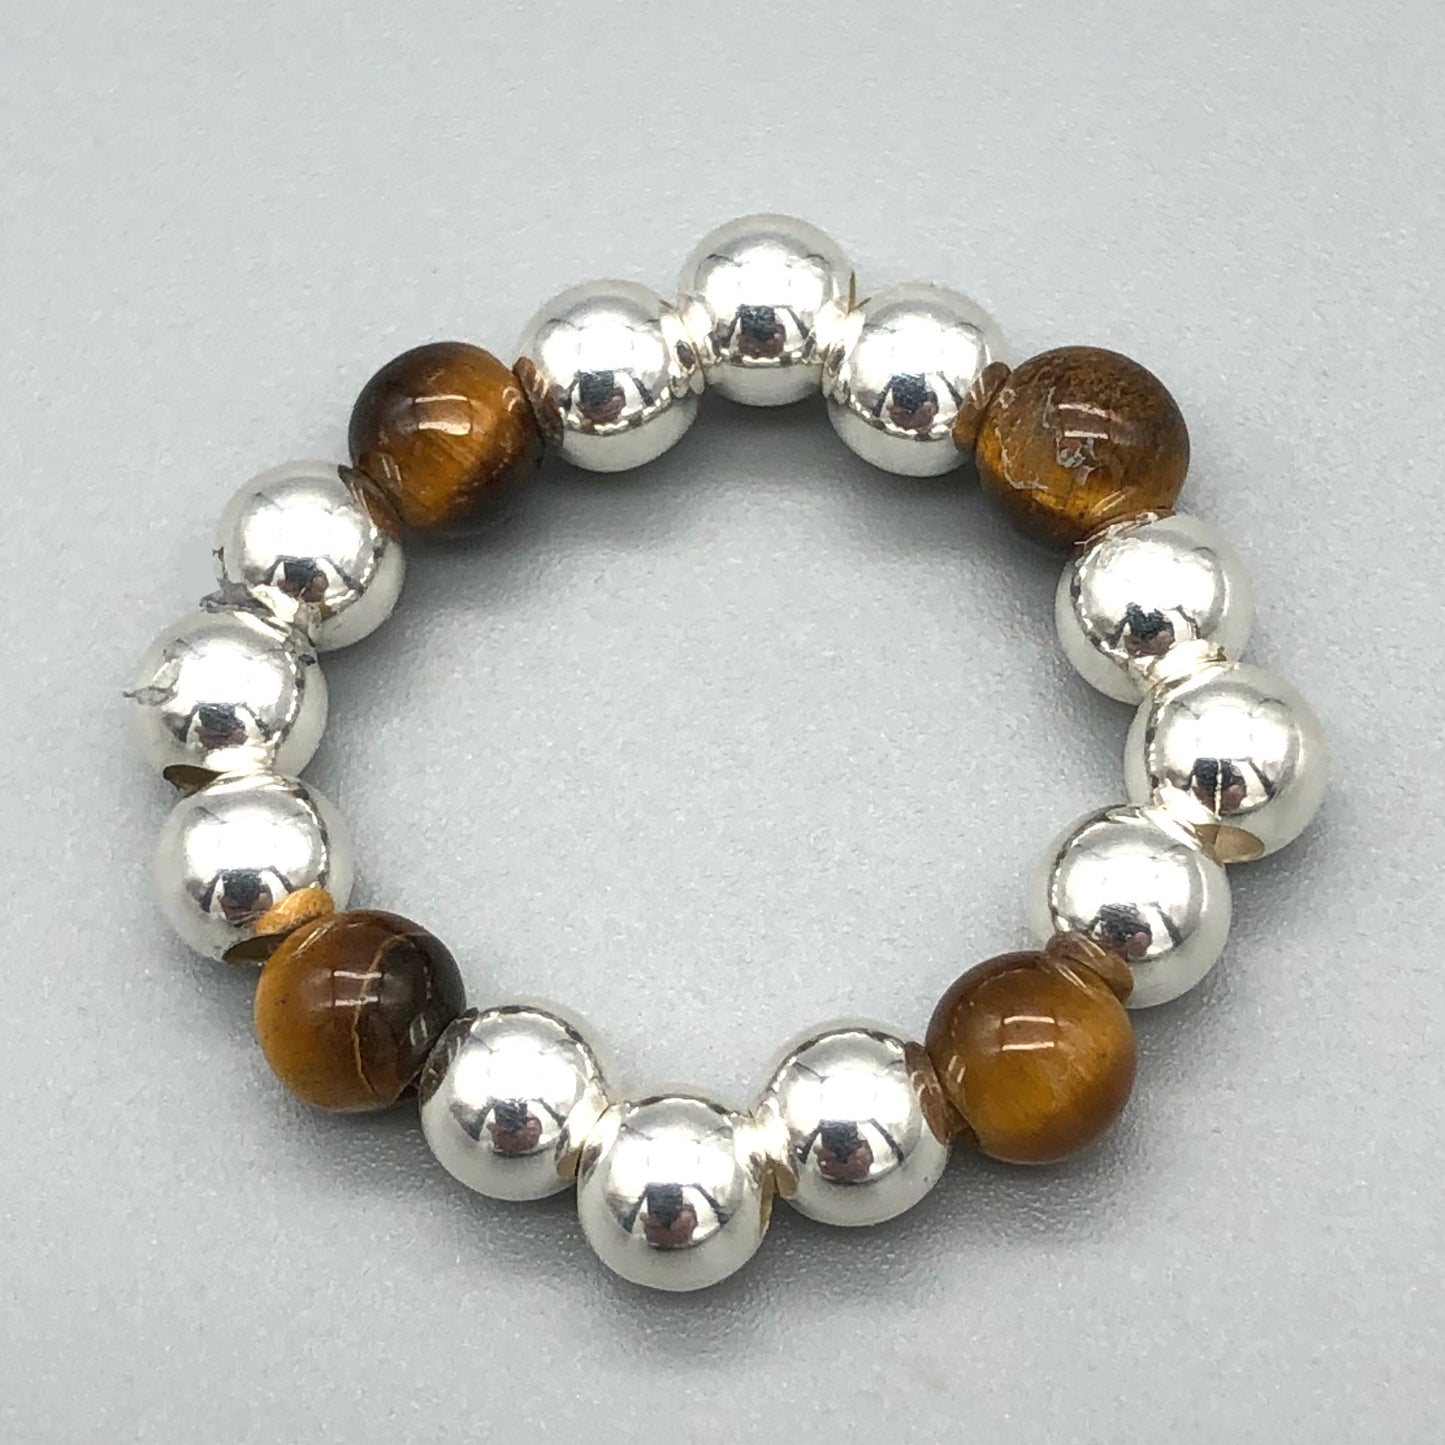 Tiger's eye & sterling silver beads women's stacking charm ring by My Silver Wish